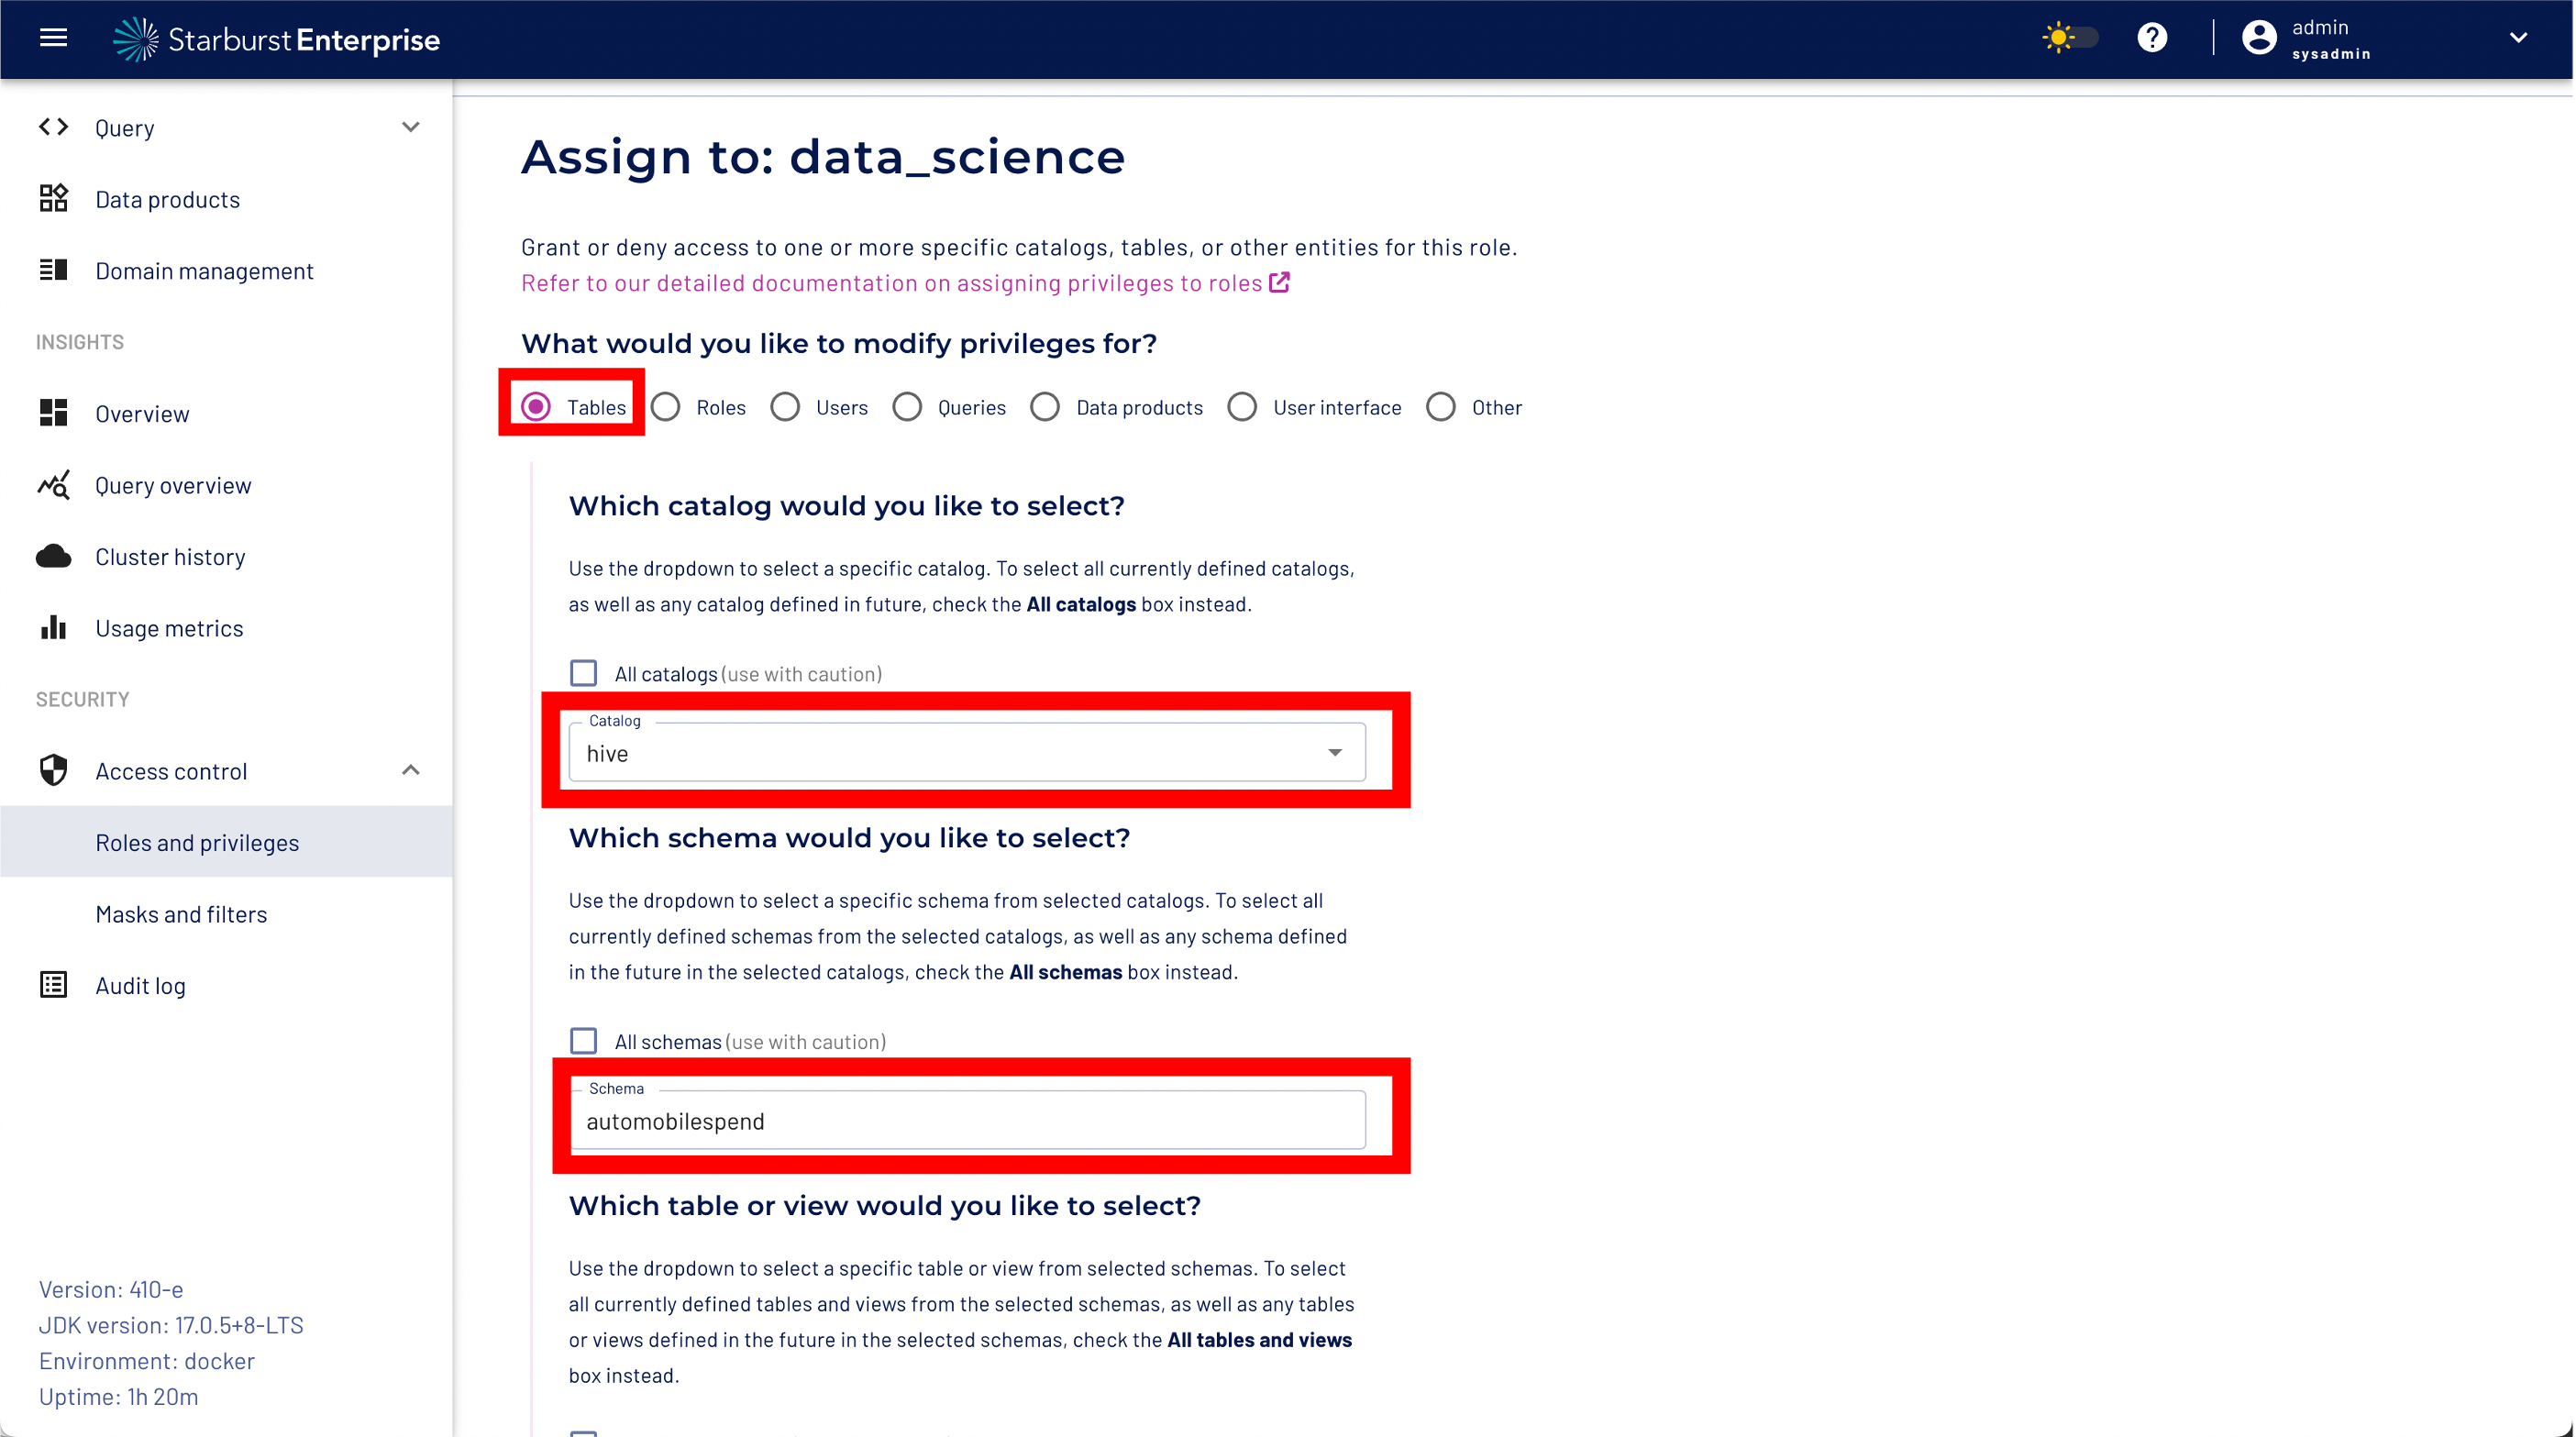 Add fine grained dataset privileges to the data_science role